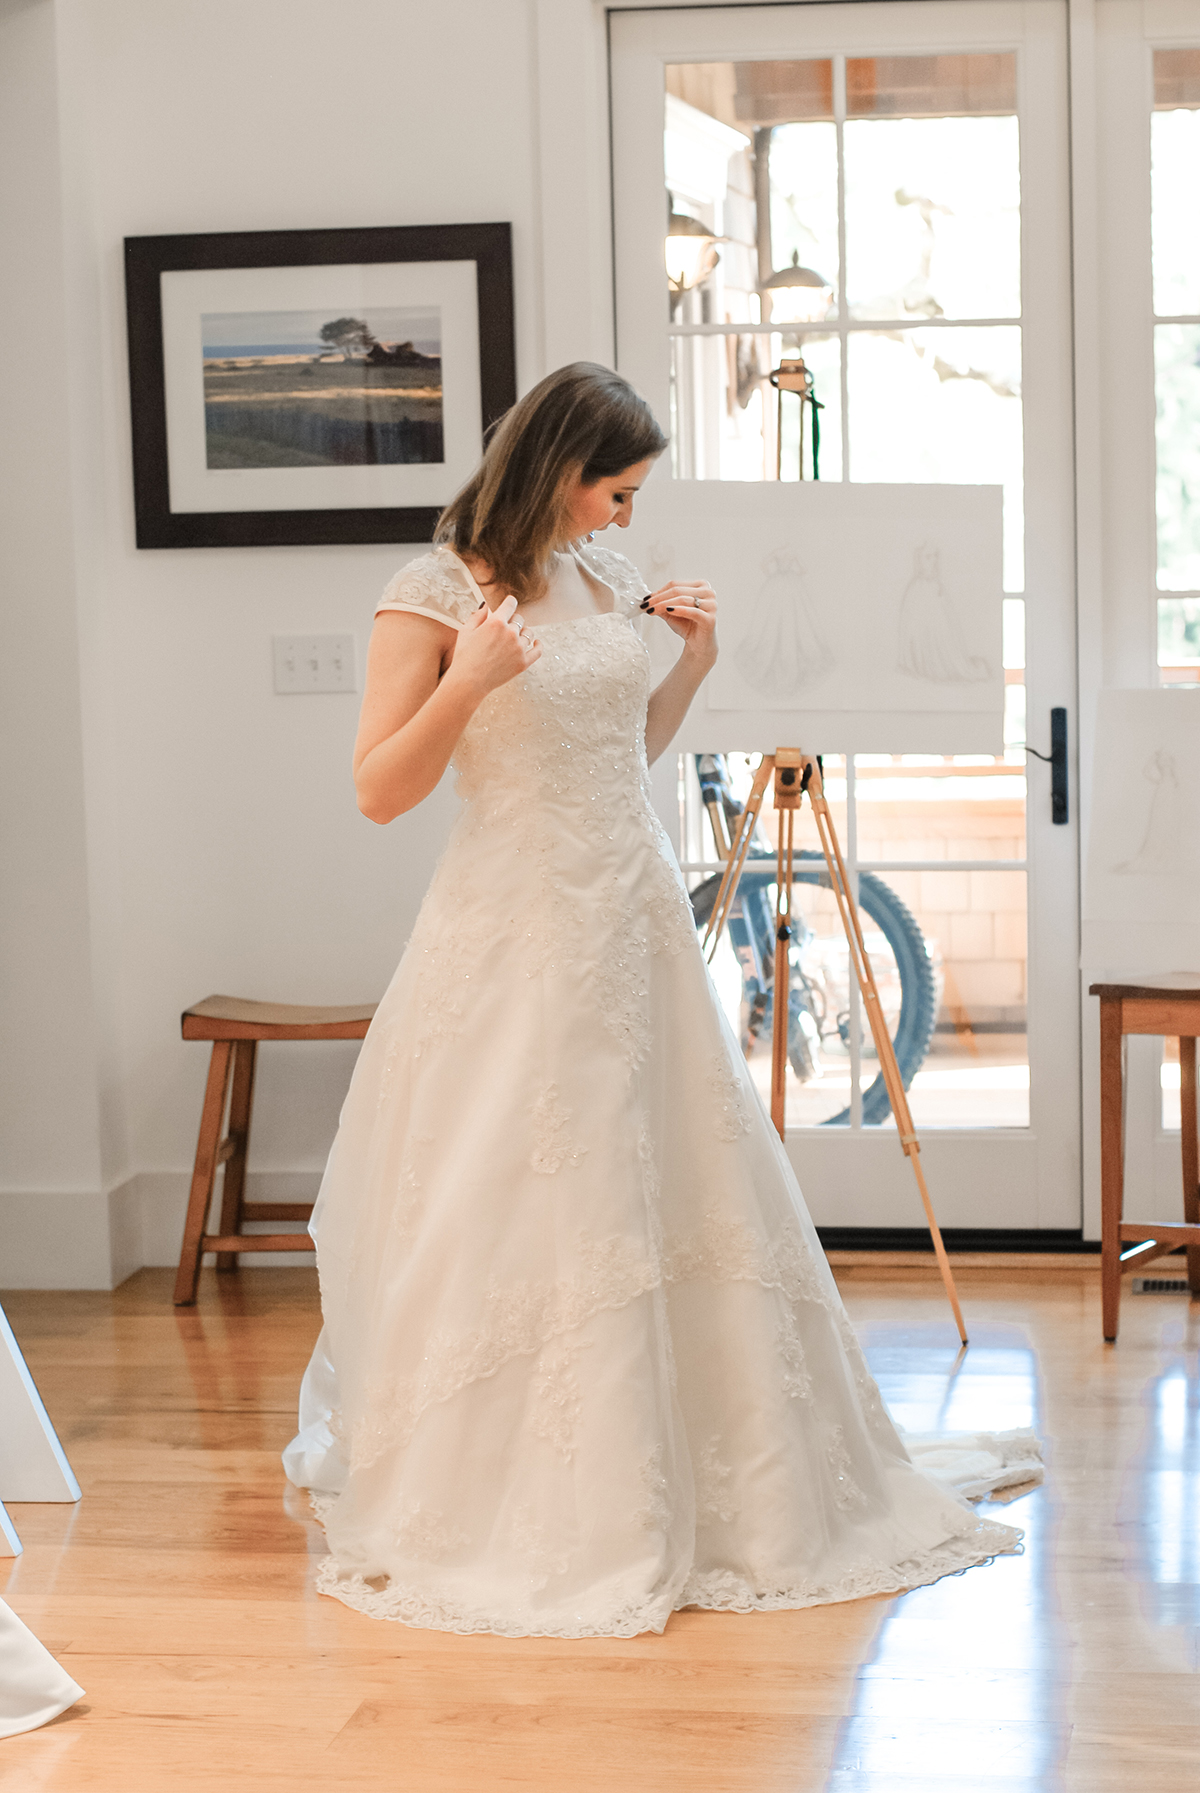 Devon examines the sleeves of a white lace A-line wedding dress